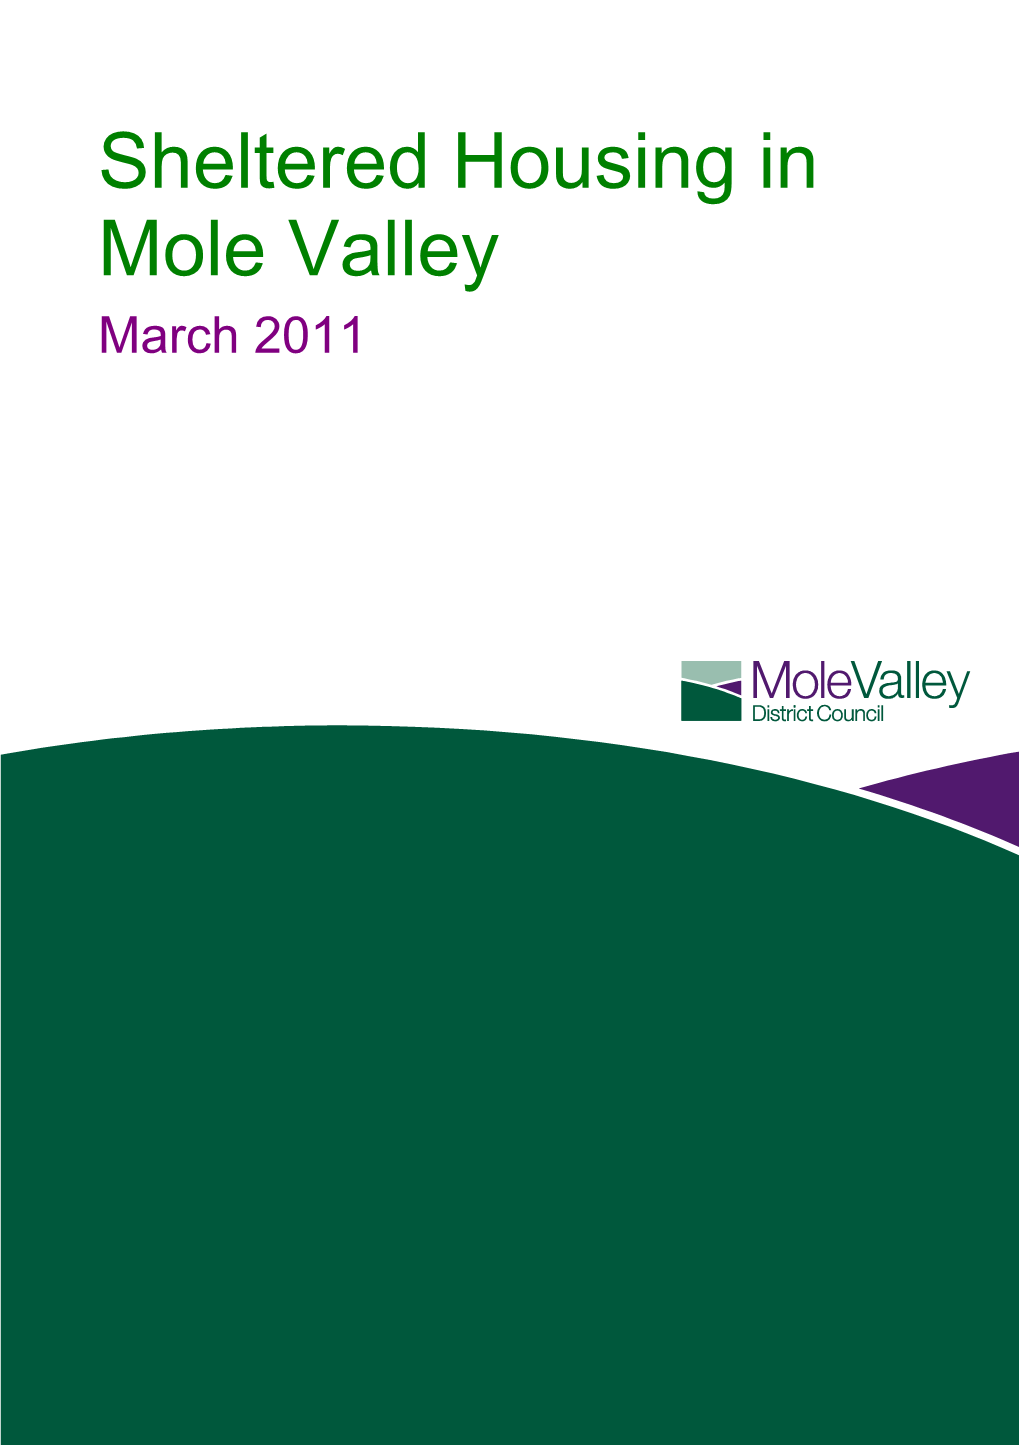 This Leaflet Tells You About the Sheltered Housing Available for Older People in Molevalley